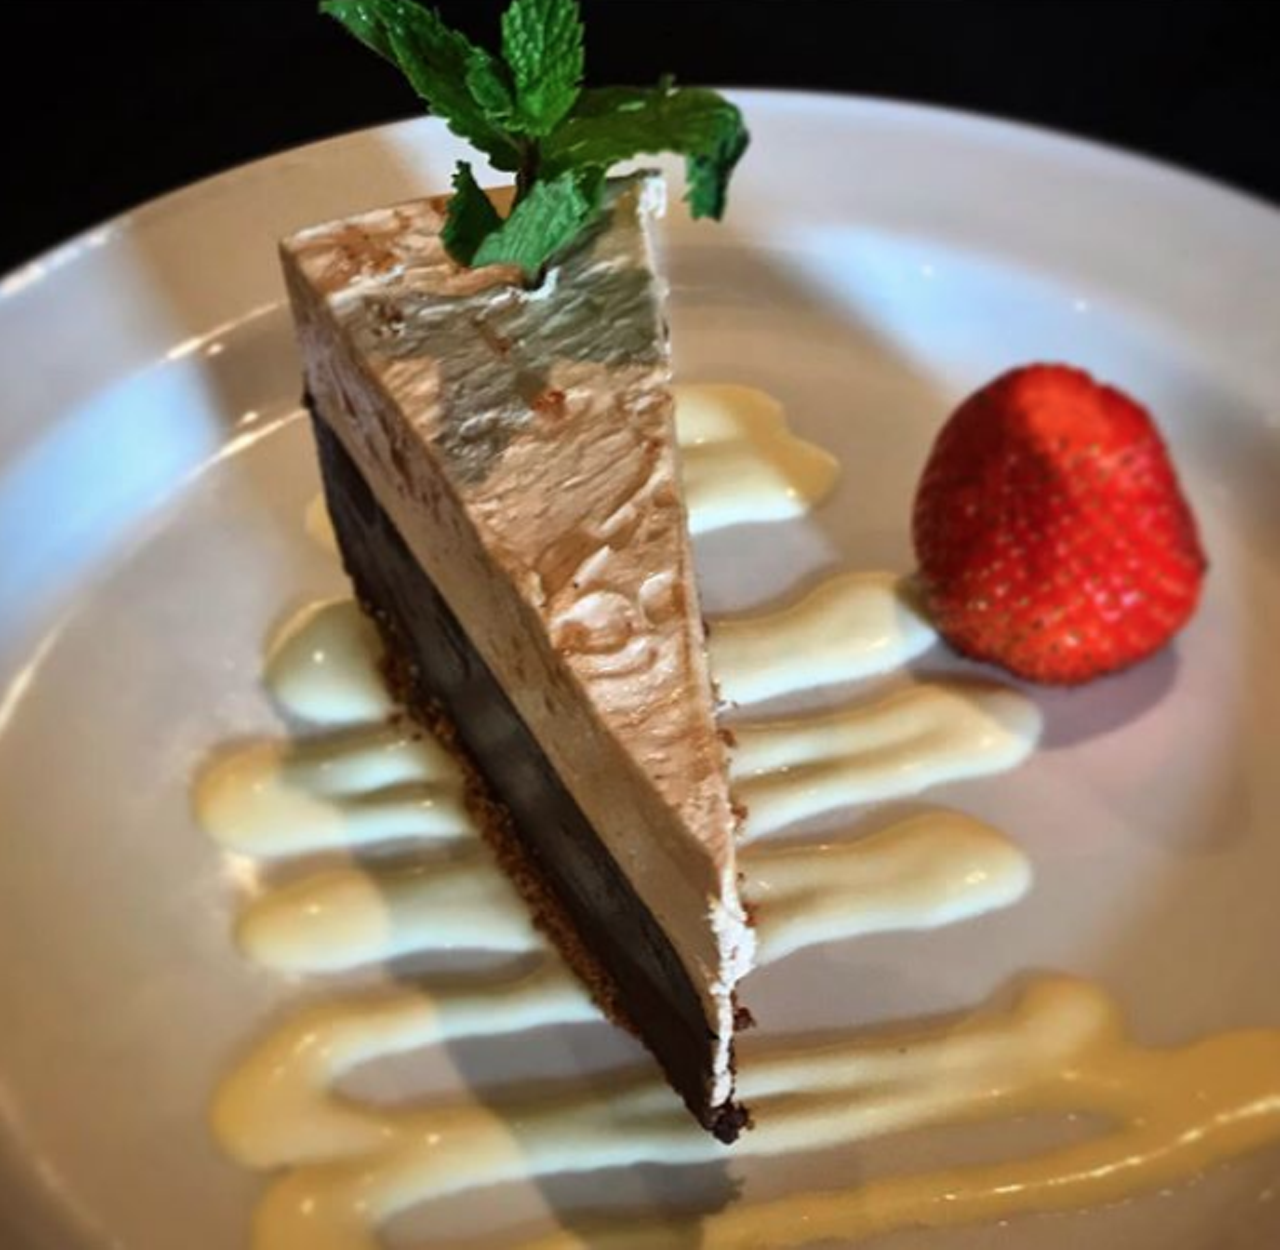 Piatti
Multiple locations, piatti.com
Go the Italian route for your birthday dinner for something super delicious. If you want some free Tiramisu, you’ll get just that if you go to Piatti on your birthday.
Photo via Instagram / piattisa